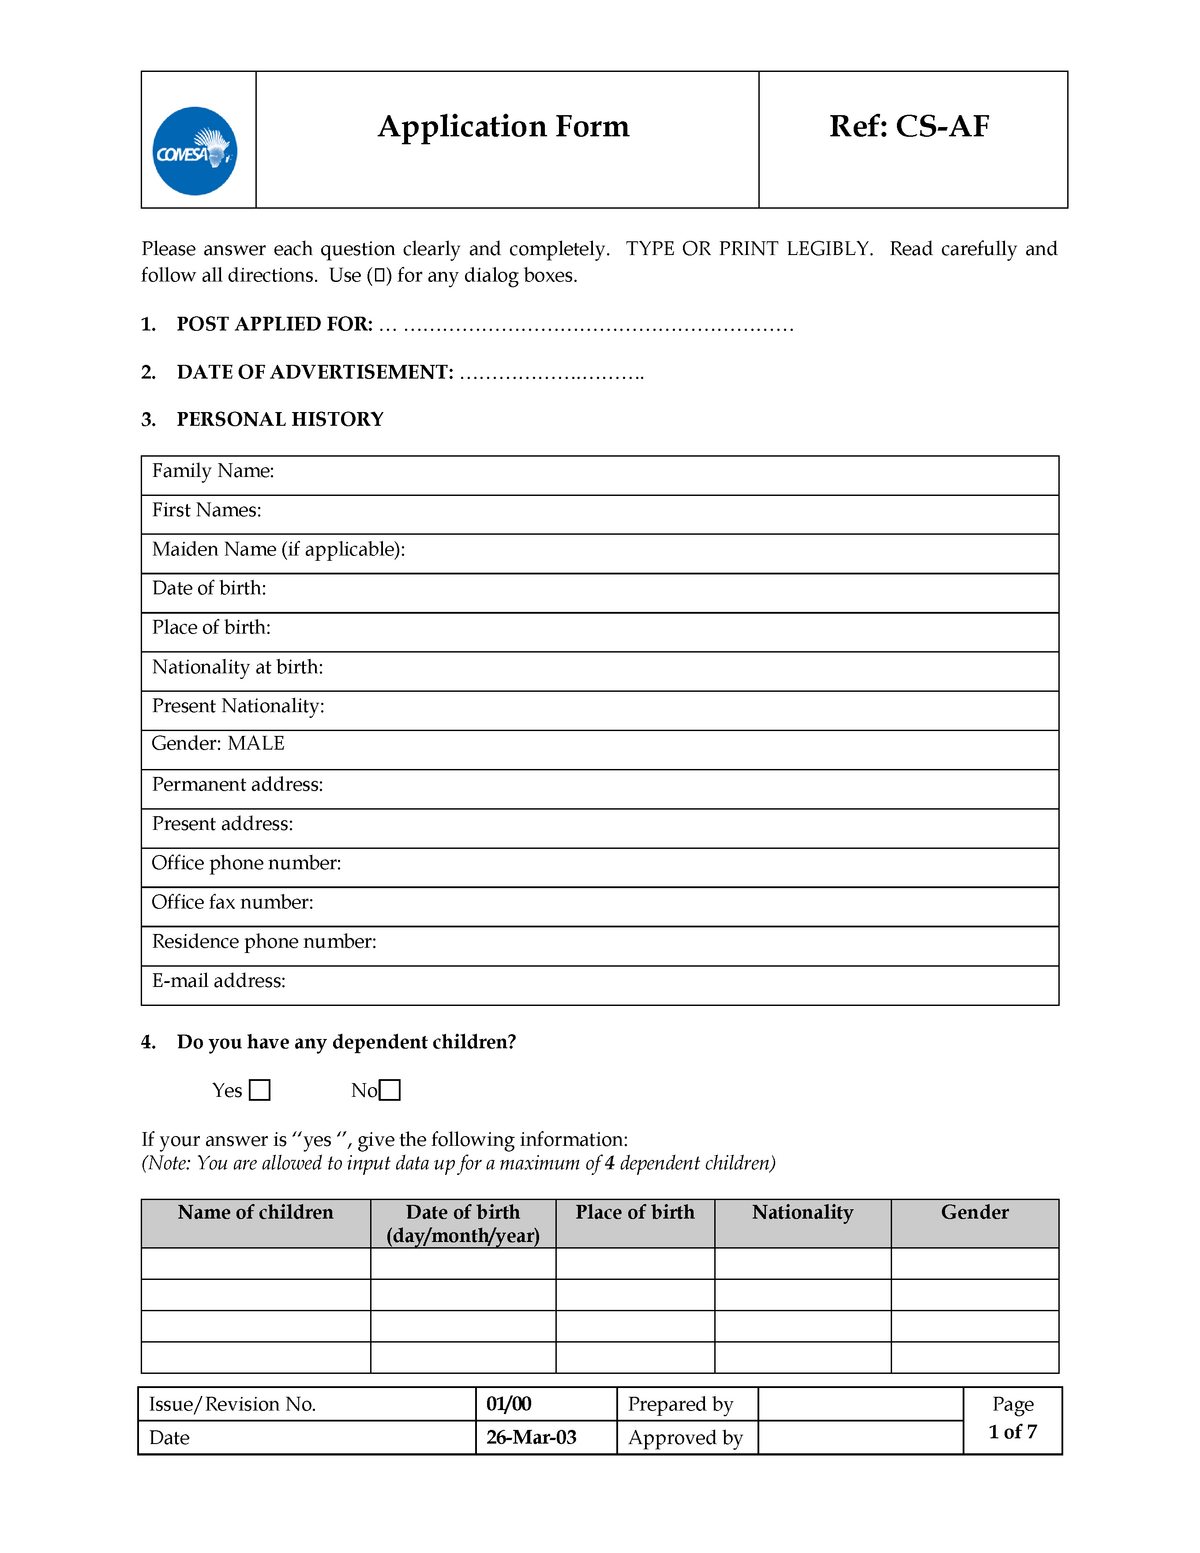 181206 Comesa Job Application Form English Issuerevision No 0100 Prepared By Page Please 9950